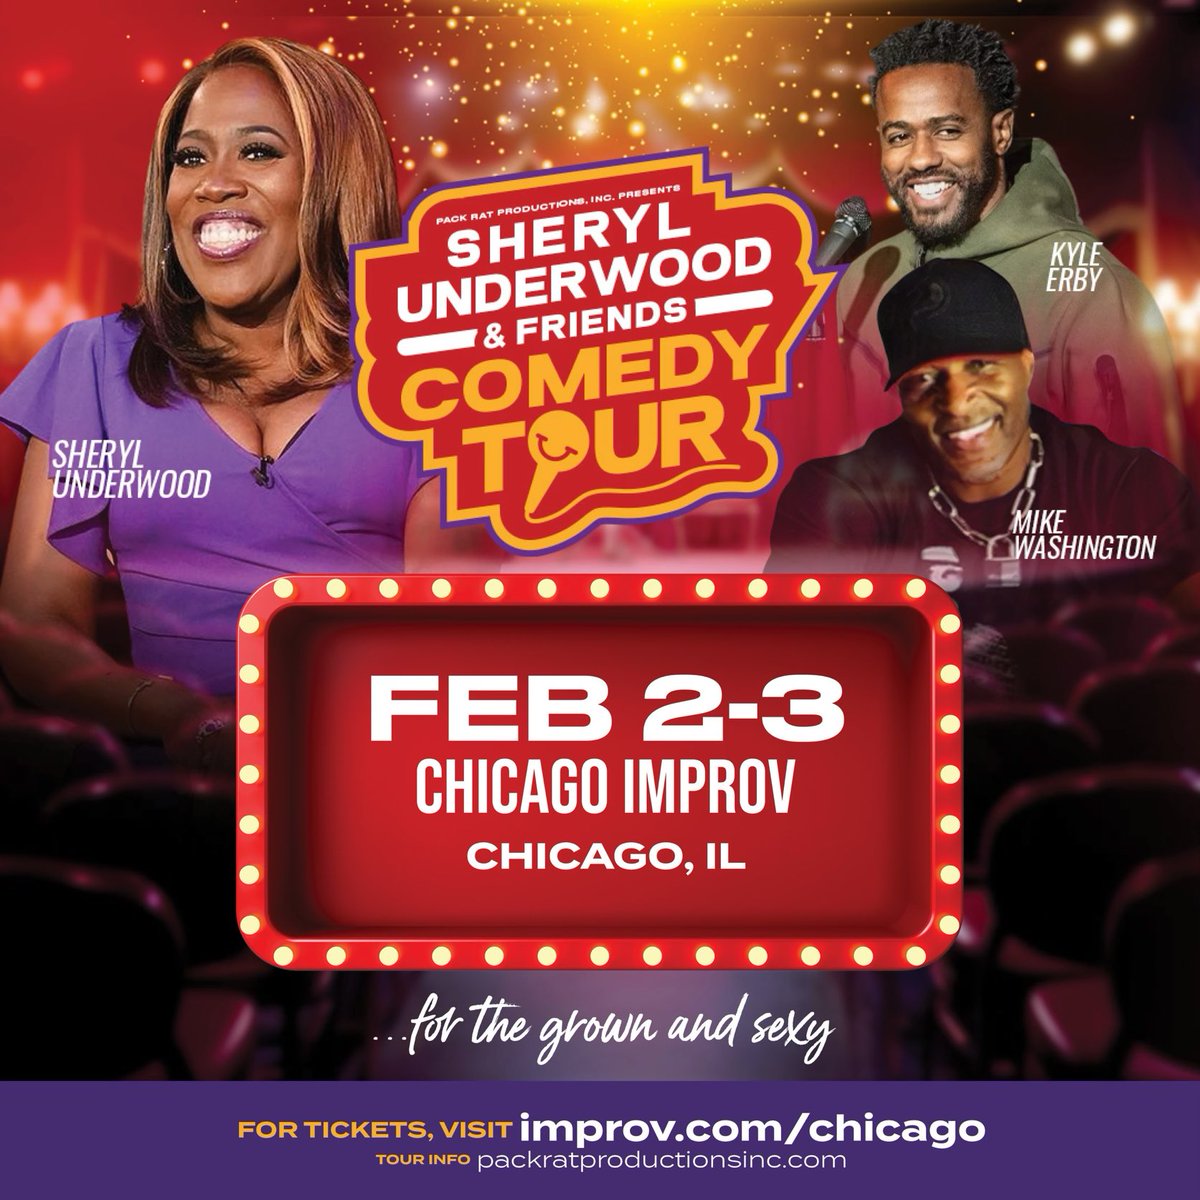 Hey🌍⁦@sherylunderwood⁩ & Friends w/⁦@KyleErby⁩ & ⁦@laffwitmikewash⁩ are coming to the Chi ⁦@ChicagoImprov⁩ get your tickets now!